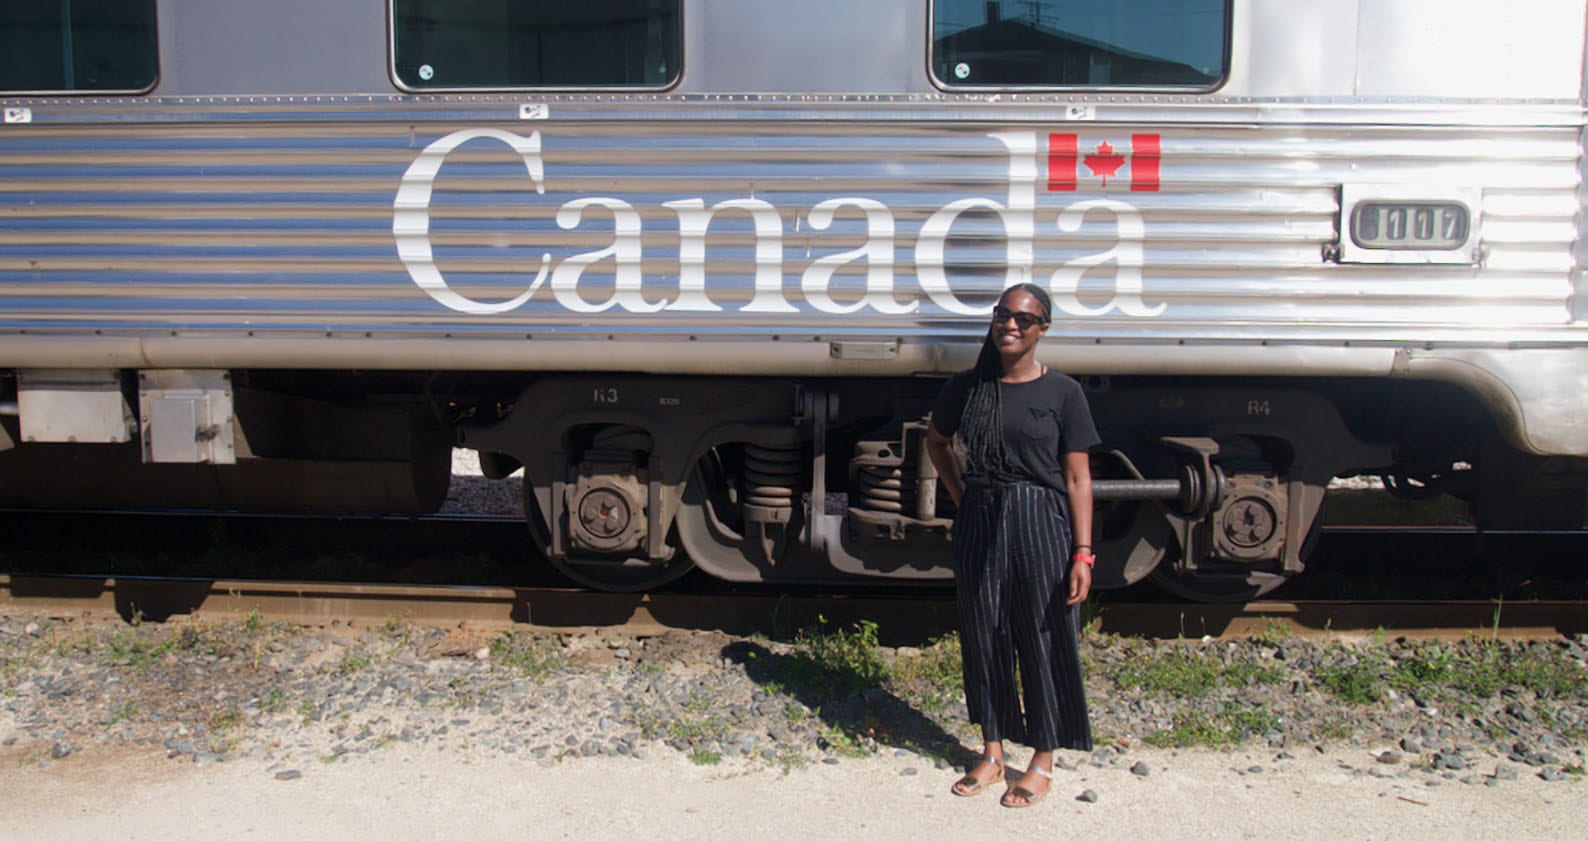 Abby Asomani stands in front a train with the words 'Canada' written on the side and the Canadian flag. 